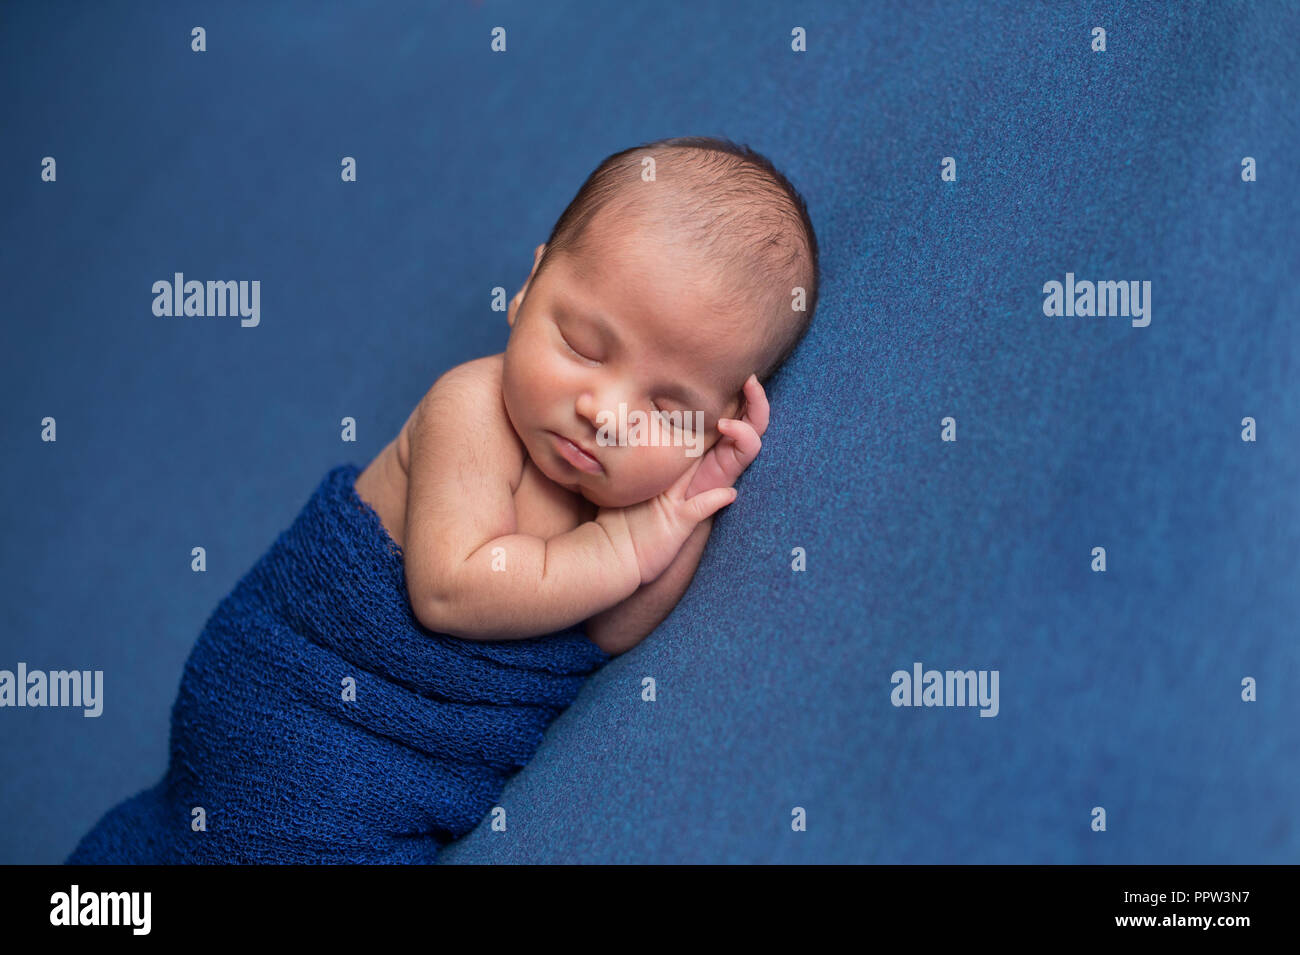 Sleeping, nine day old newborn baby boy swaddled in a blue wrap. Shot in the studio on denim blue material. Stock Photo